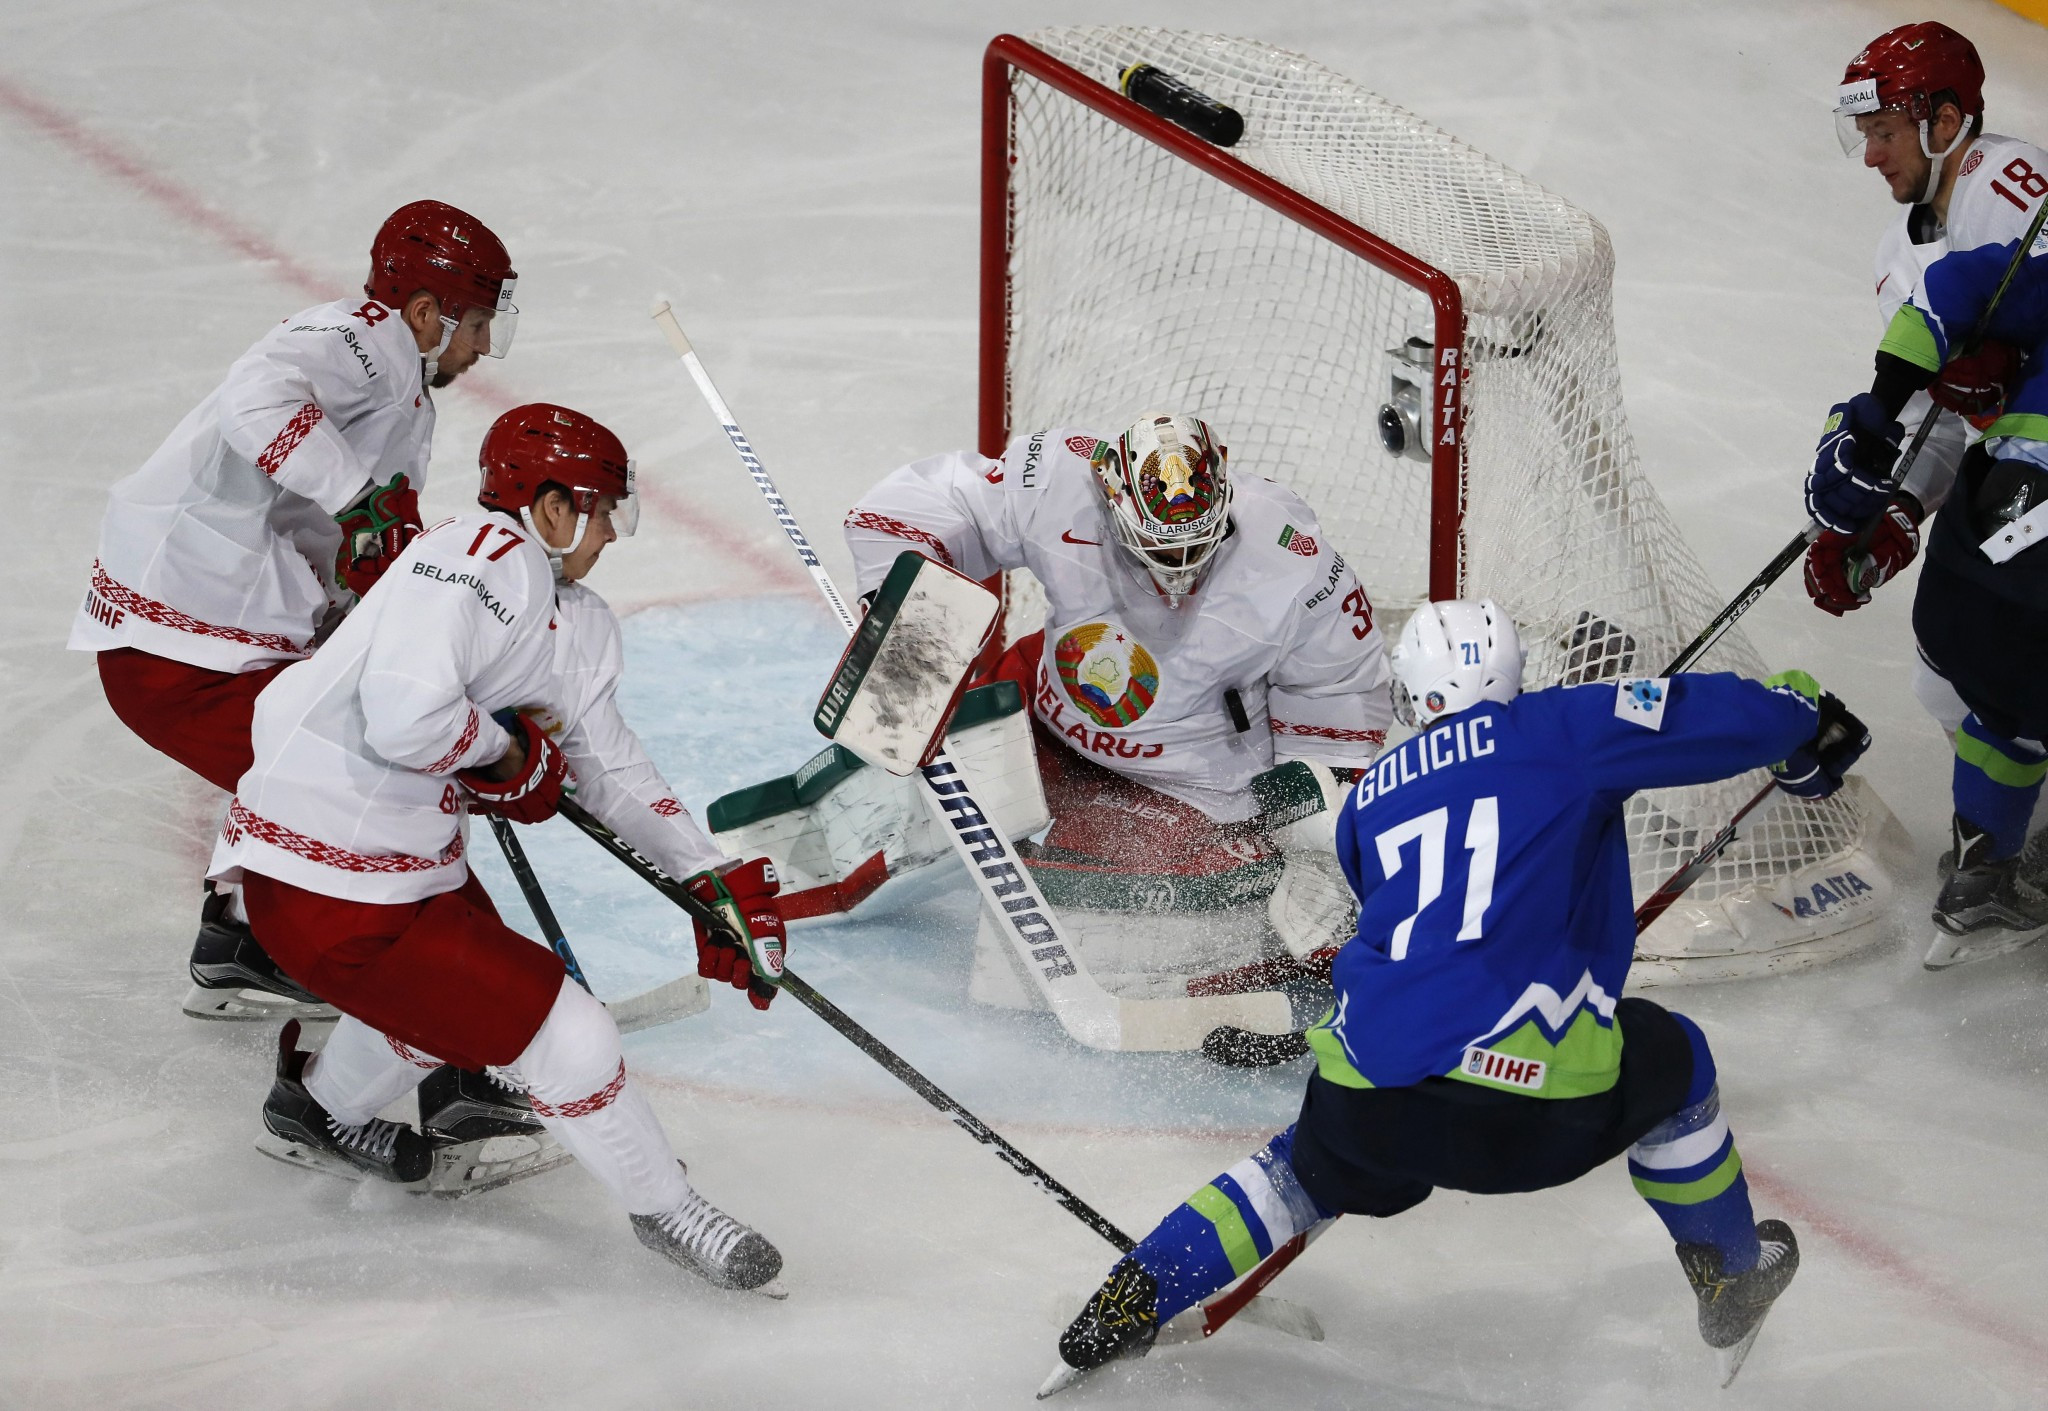 Belarus finished 13th in this year's IIHF World Championships in Cologne and Paris ©Getty Images